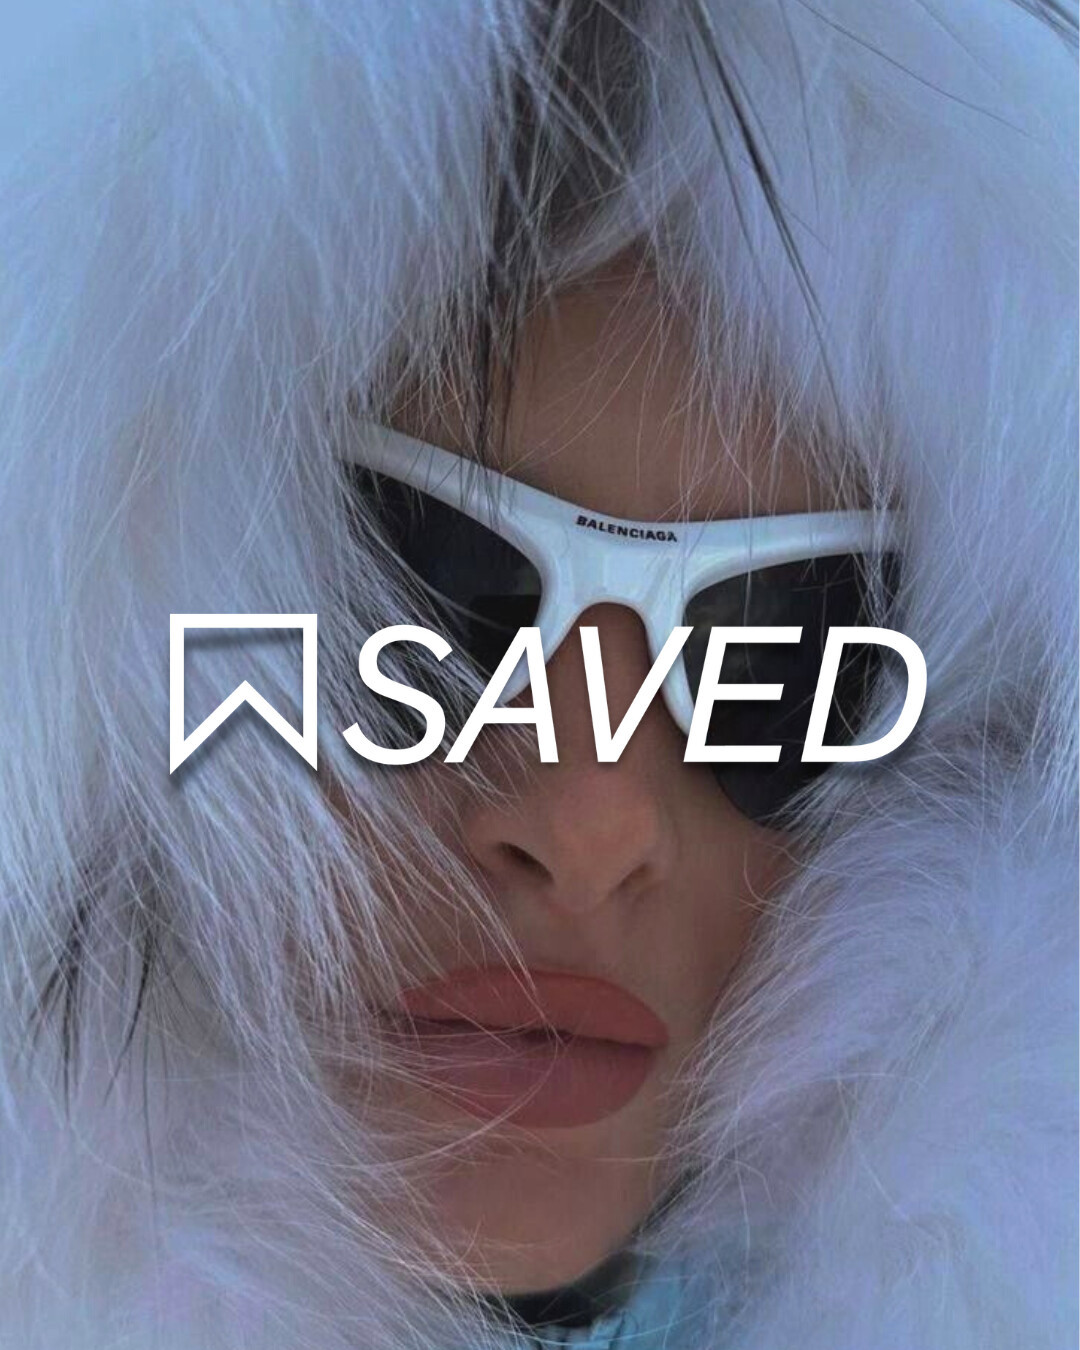 A dump of what we SAVED last week for you to save, cold aesthetic edition, white fur (fake fur obvs) edition:

1. Balenciaga sunglasses moment via @dodobazaar
2. Giant hat at Fendi Resort 2023 collection
3. Gunia Project photoshoot
4. Jacquemus off-white fluffy balaclava
5. Arakii Frost jacket worn by @hannaschonberg
6. Fluffy mohair pants by SuperTanya
7. Jiranxia FW2022
8. Nadia Lee Cohen fur AND hair moment
9. Jean Shrimpton for Vogue Magazine by David Bailey, 1965